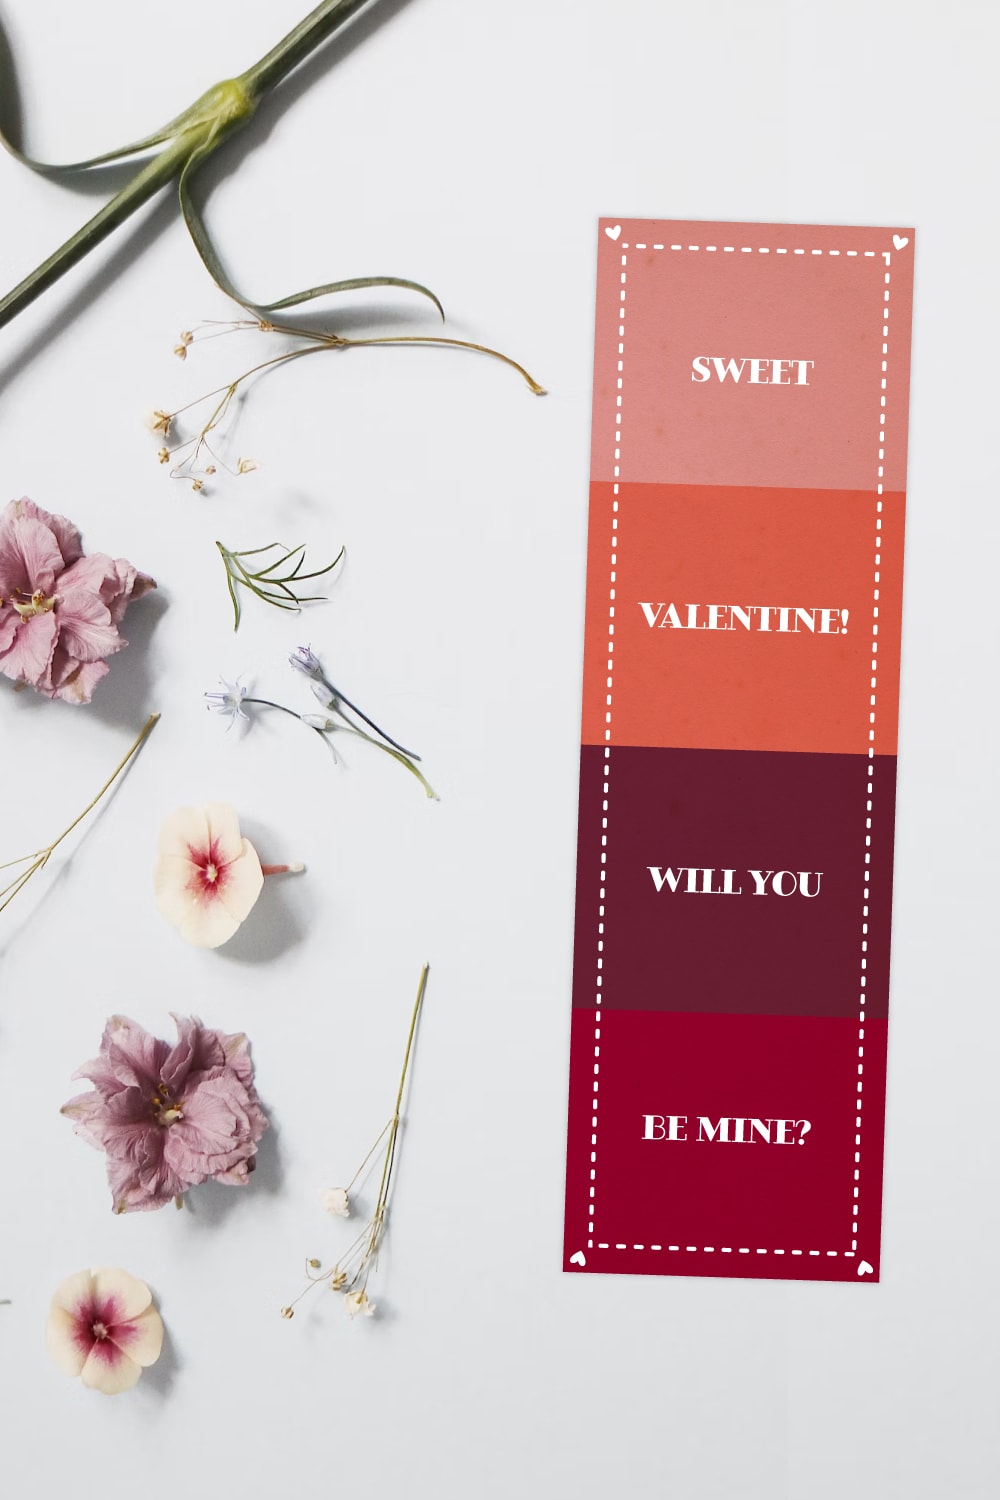 Preview of sweet valentine printable bookmark on the right side with a variety of wildflowers on the left side on a white background.